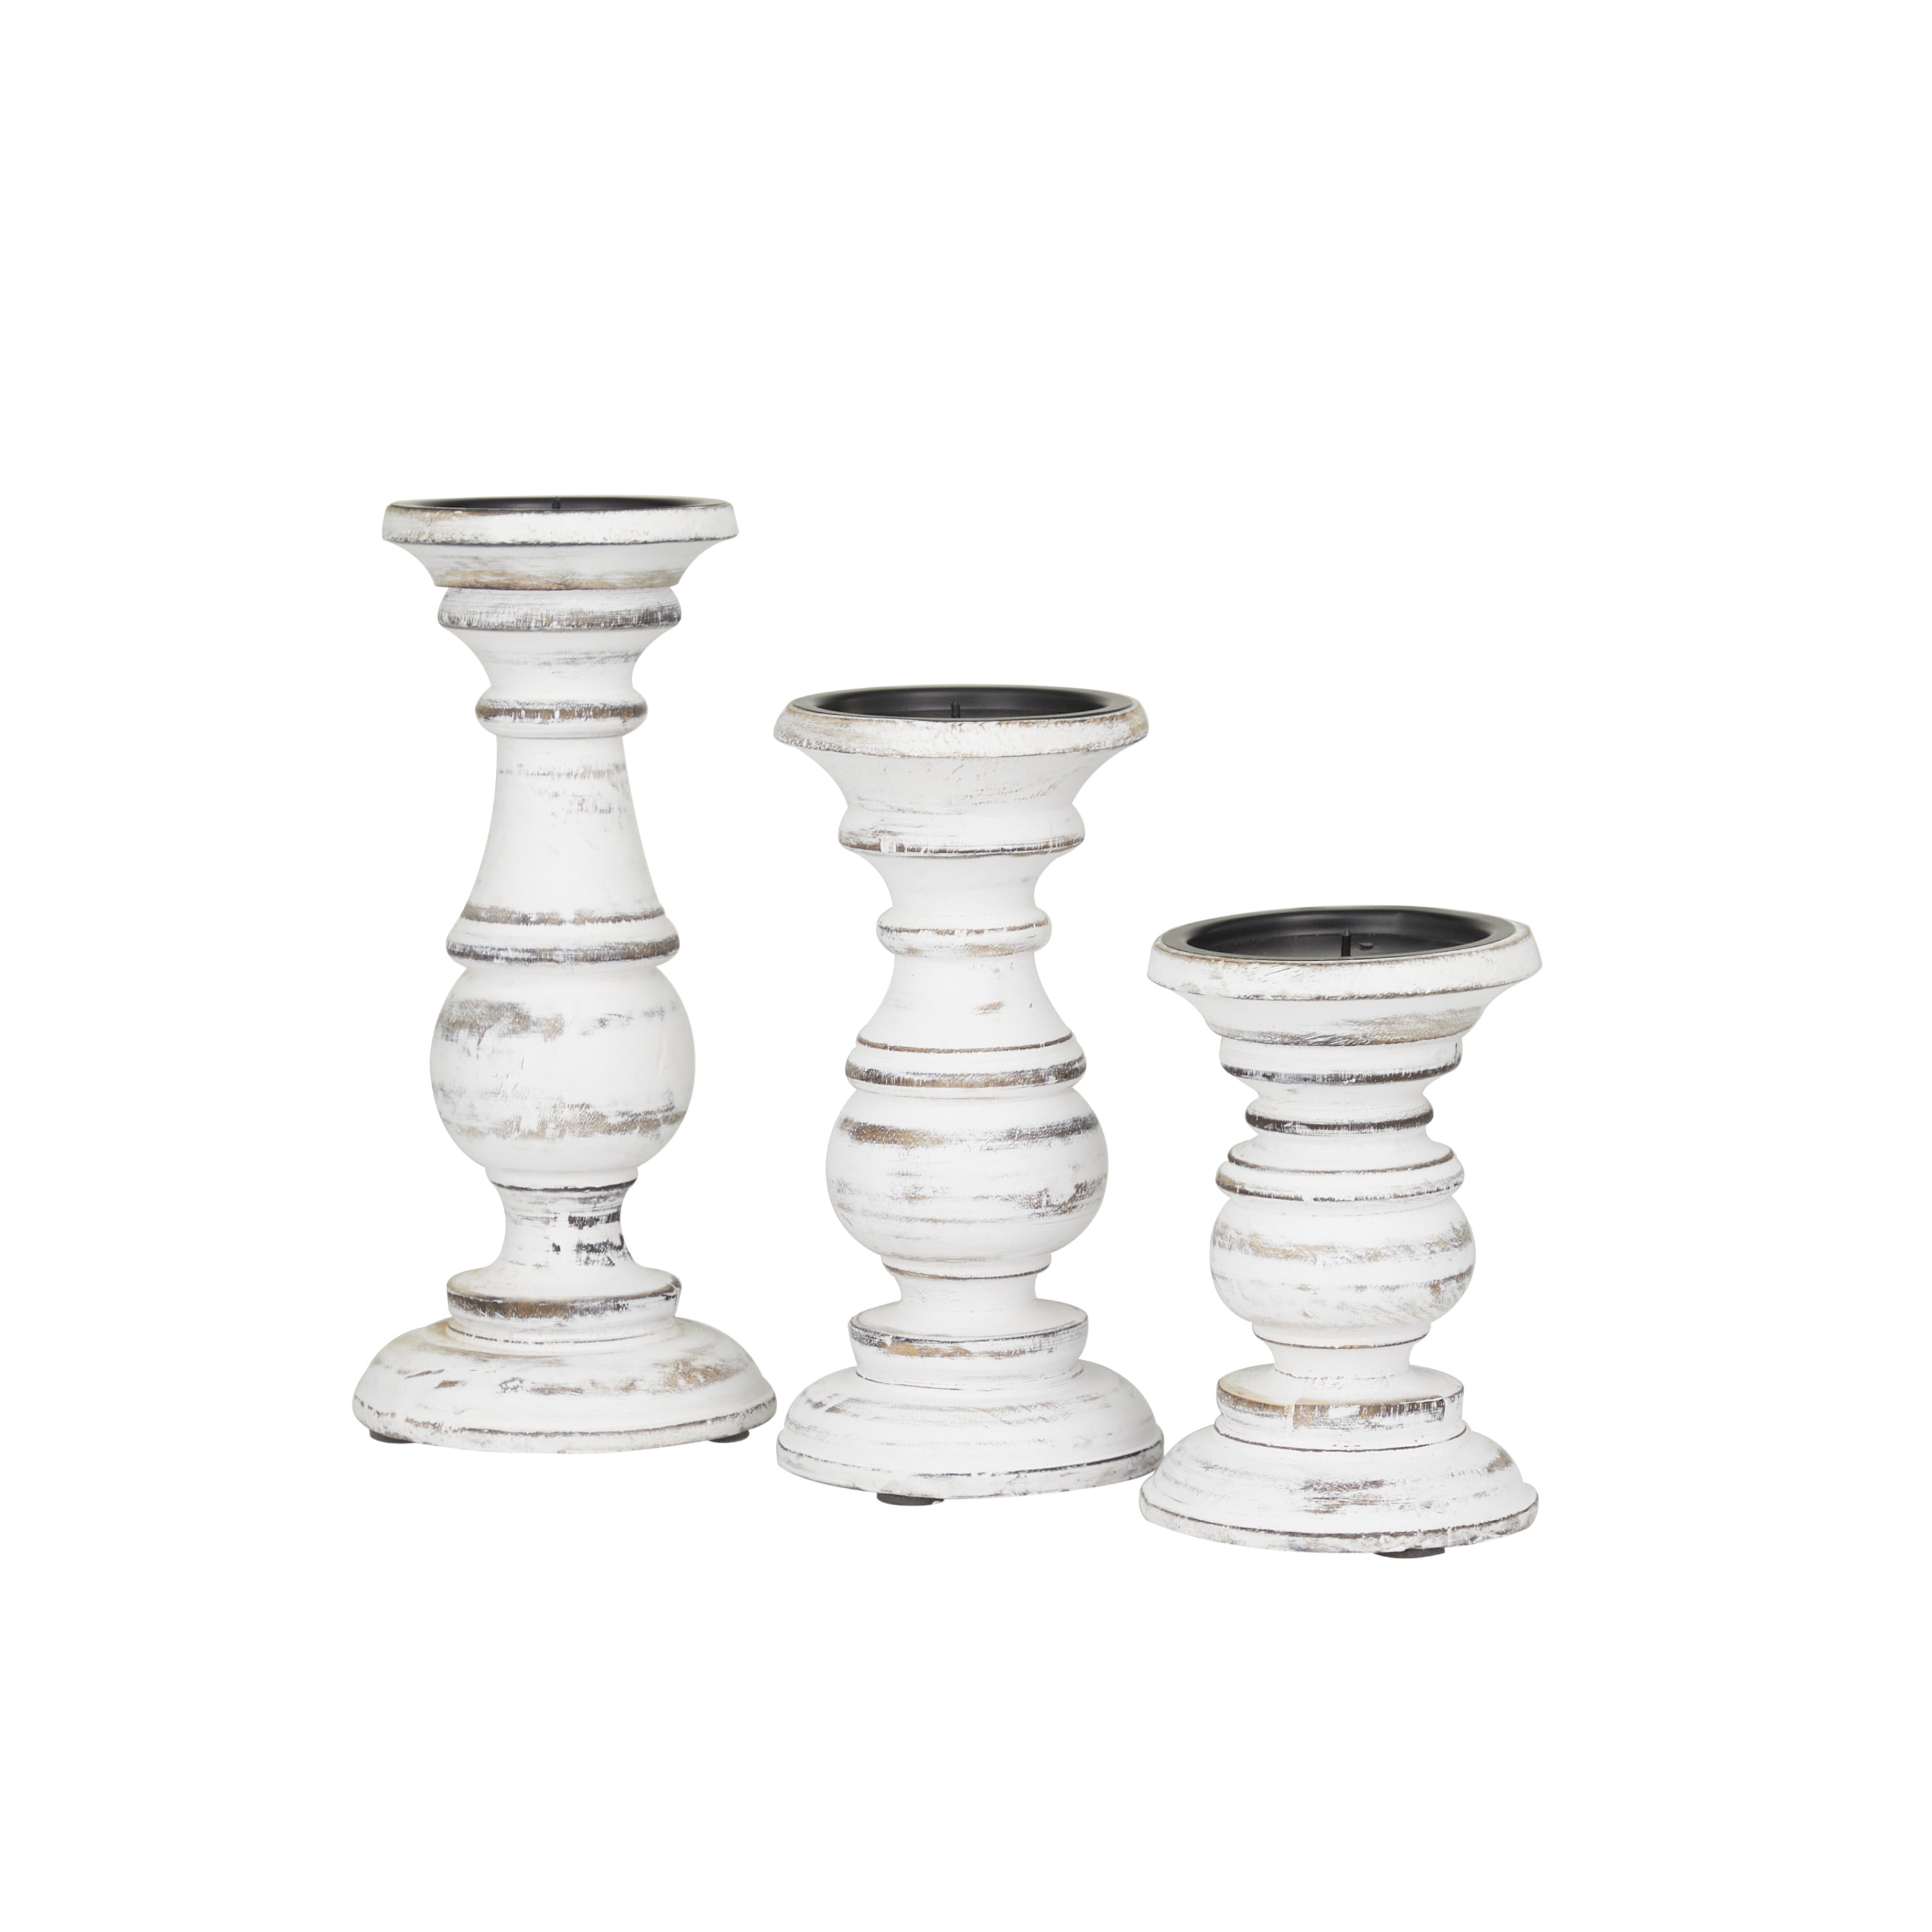 Woodland 51535 Short and Sweet Wooden Candle Holder Set of Three in White Paint Finish 